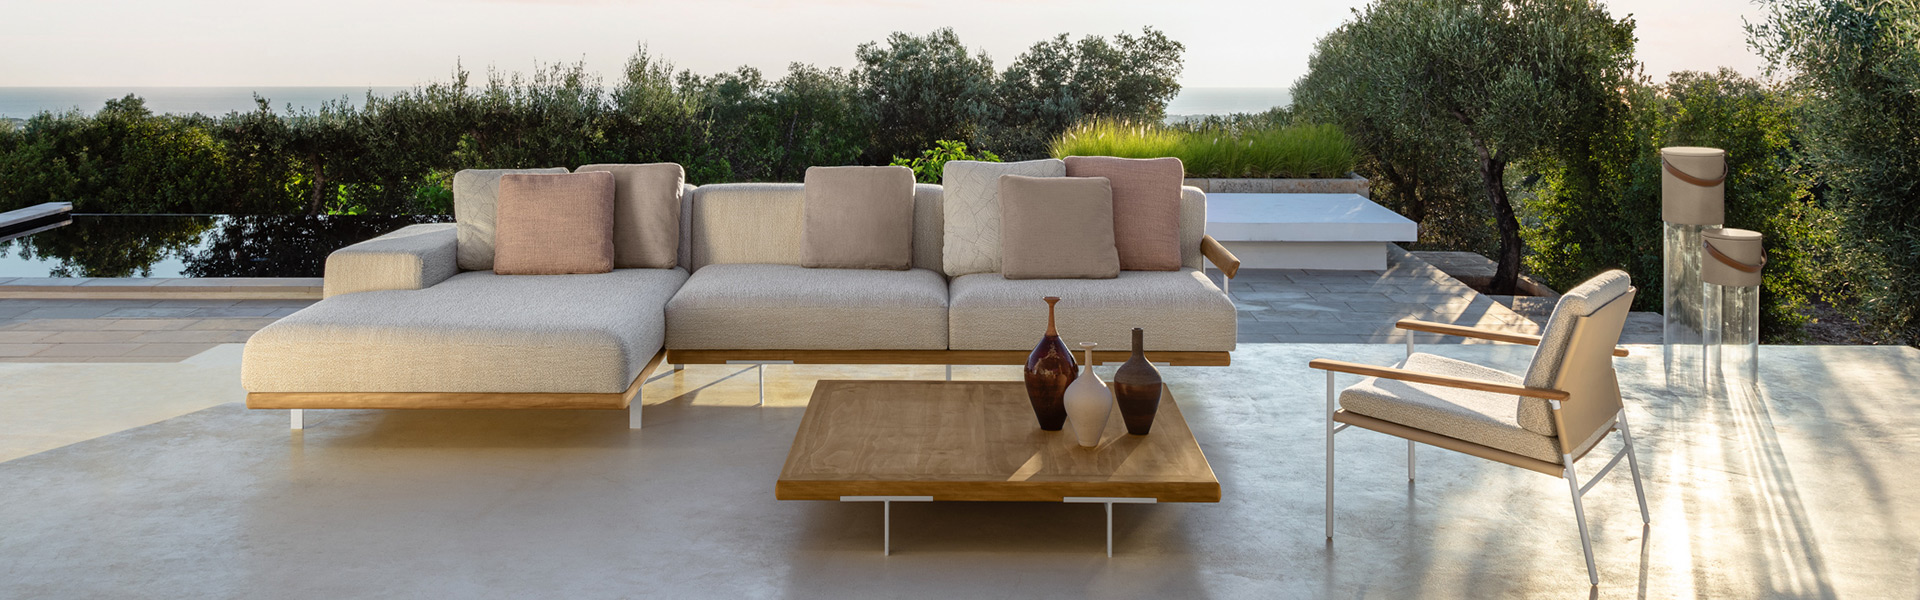 A comfortable and stylish outdoor seating area with furniture from Talenti